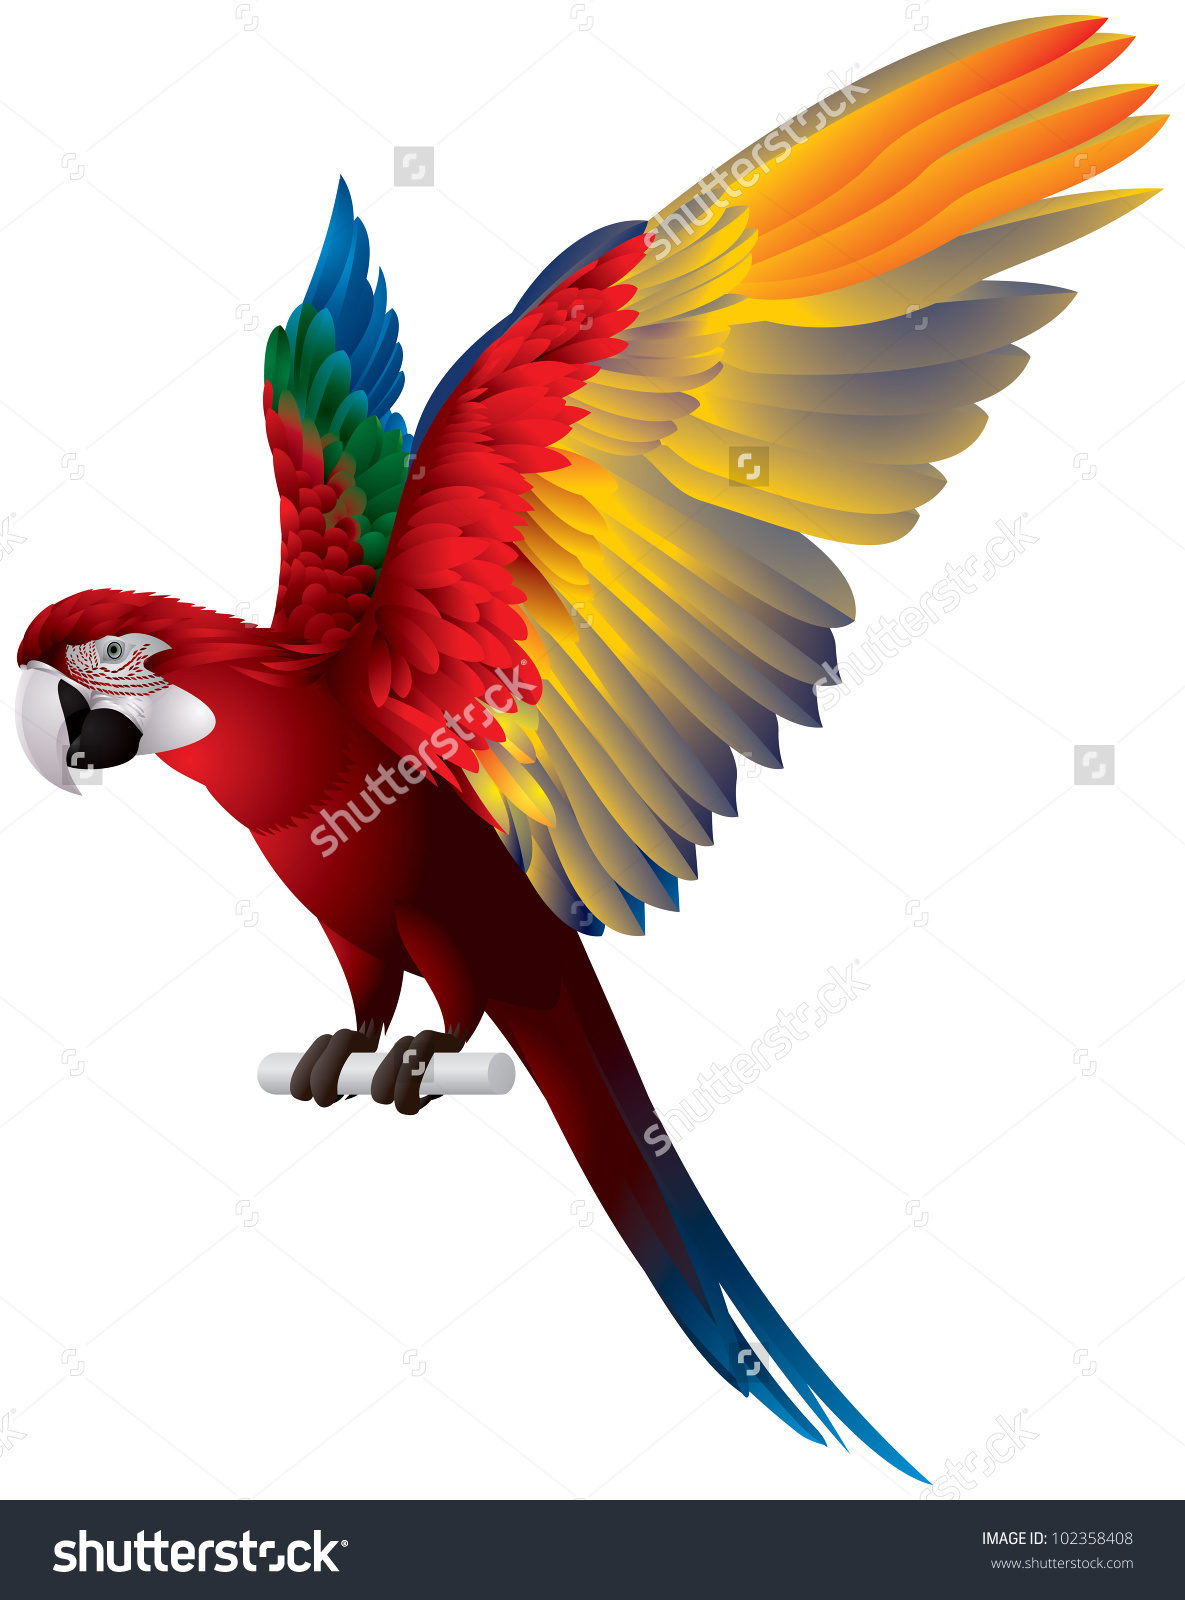 High Resolution Wallpaper | Red-and-green Macaw 1185x1600 px